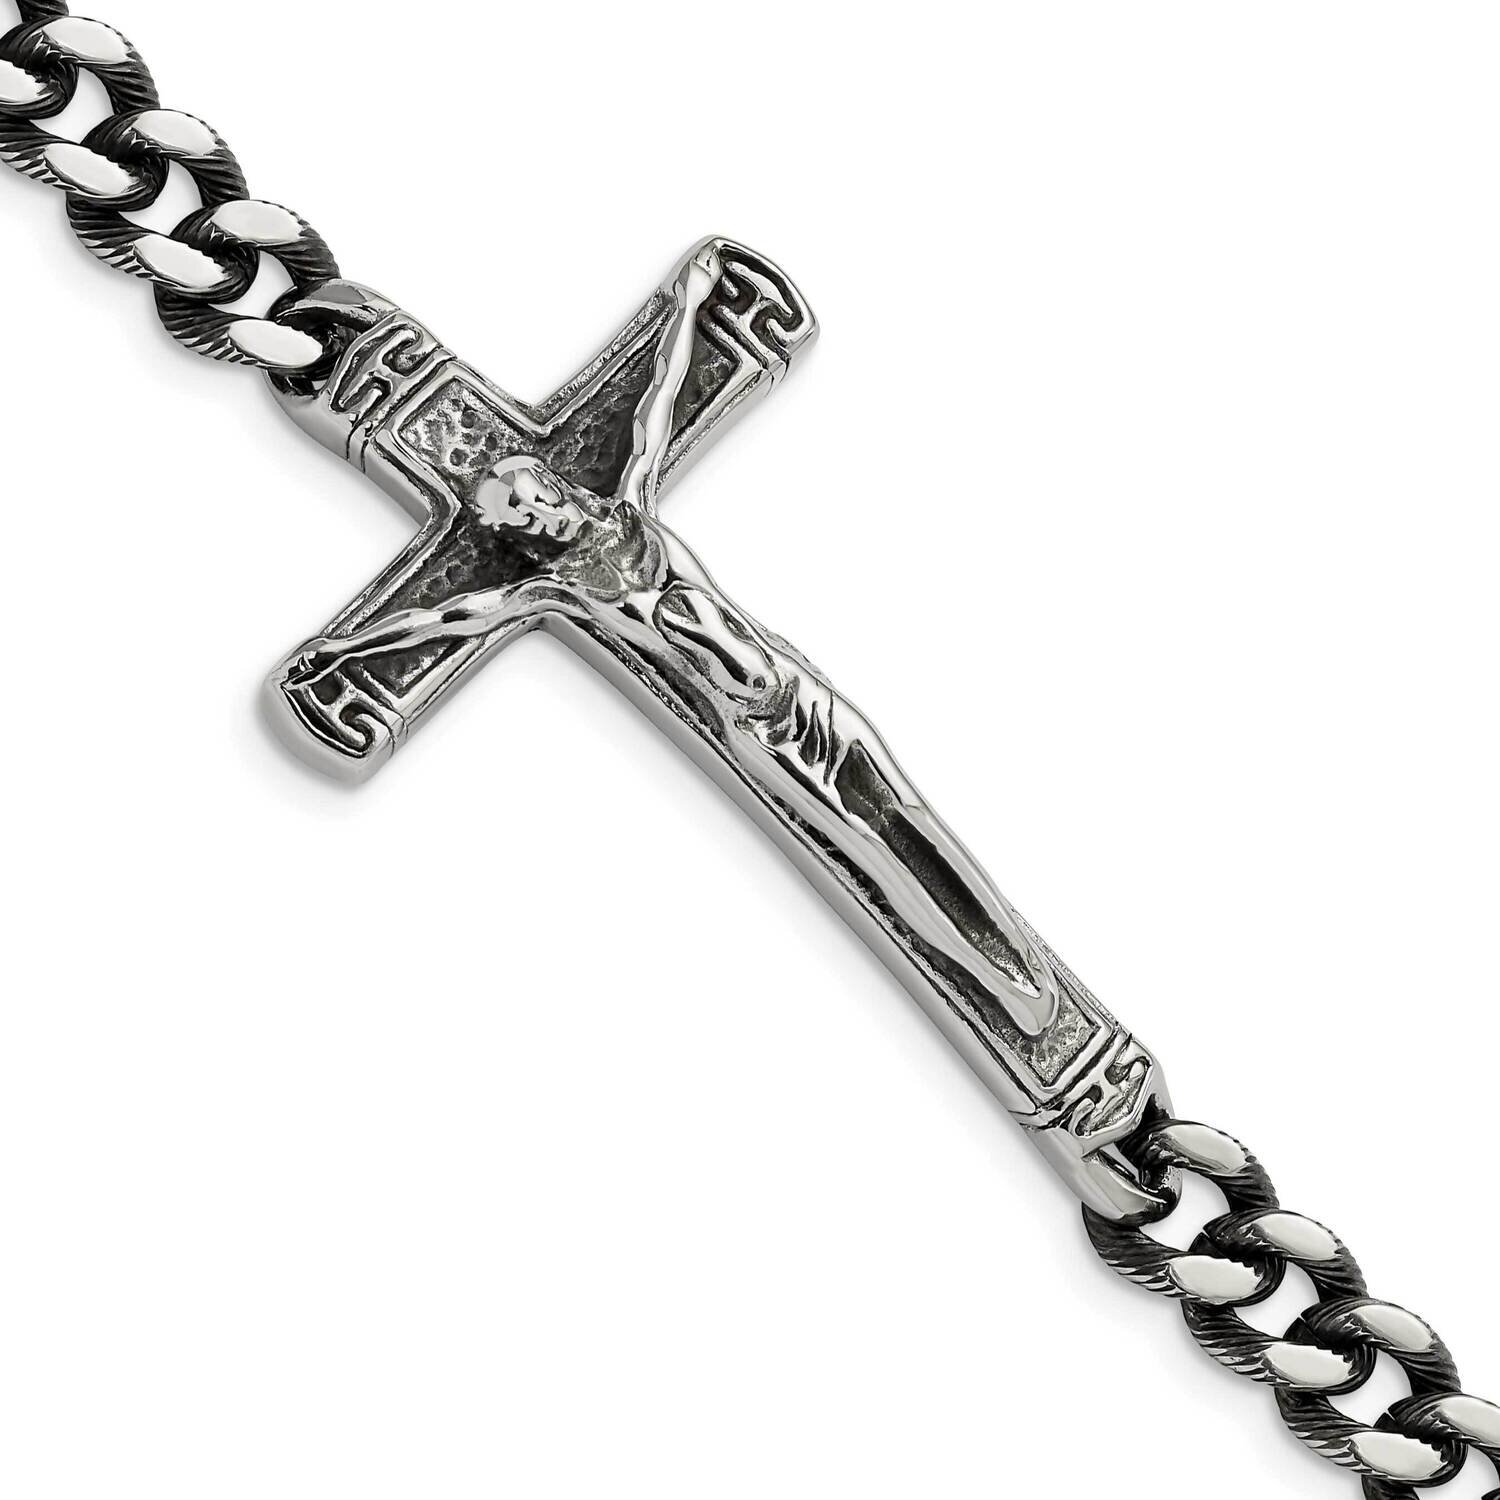 Polished Crucifix 8.75 Inch Bracelet Stainless Steel Antiqued SRB2651-8.75